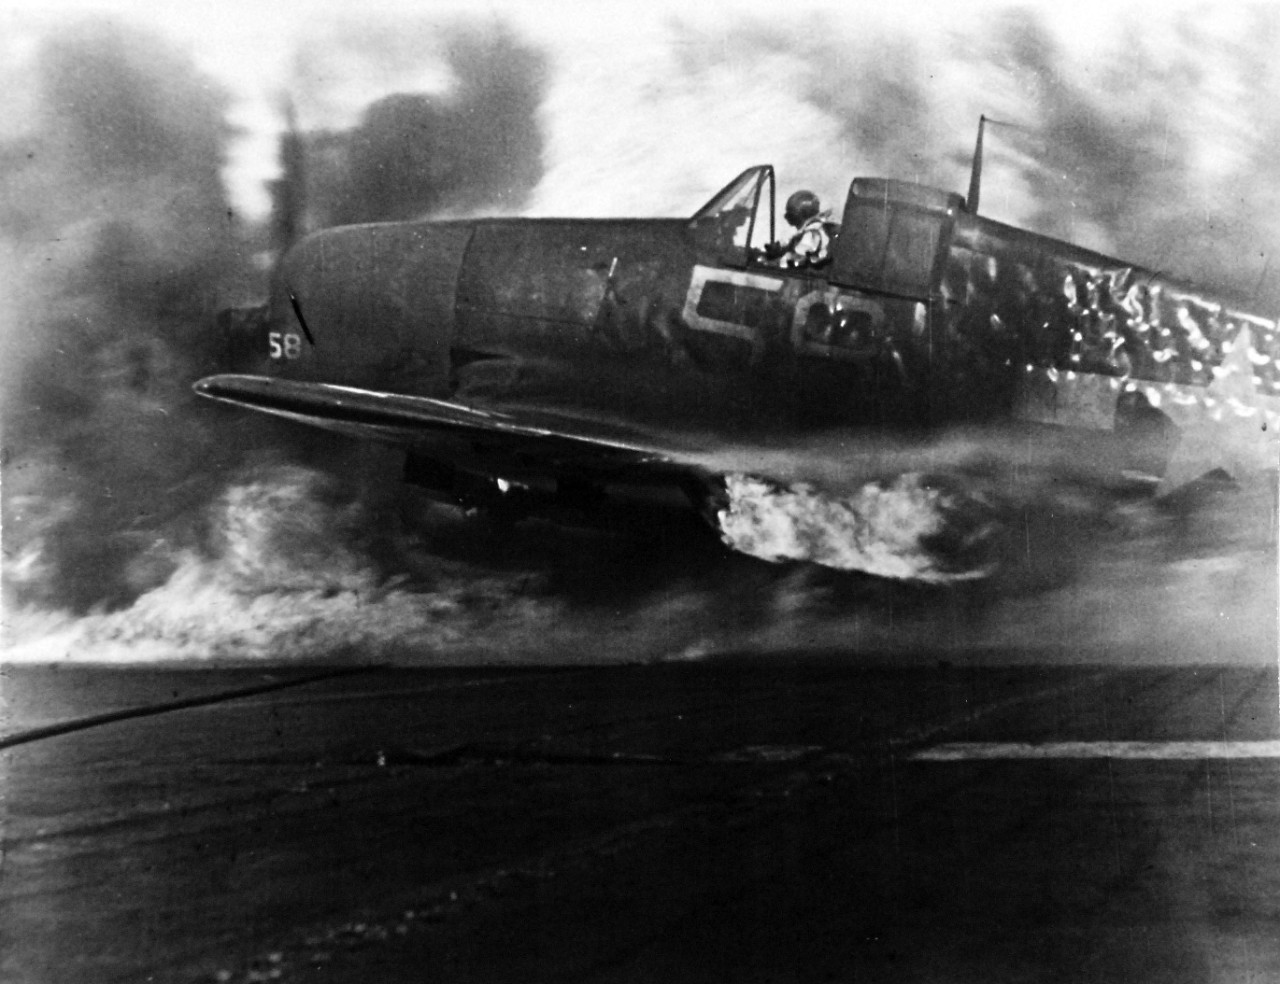 80-G-49697: Japanese Kamikaze Attack, June 1945. View of wounded pilot making a landing with his burning plane which was hit by a kamikaze.  The plane is aflame, smoke rolls around it as firefighters not seen in this picture converge on it.    Released June 28, 1945.   Official U.S. Navy photograph, now in the collections of the National Archives.  